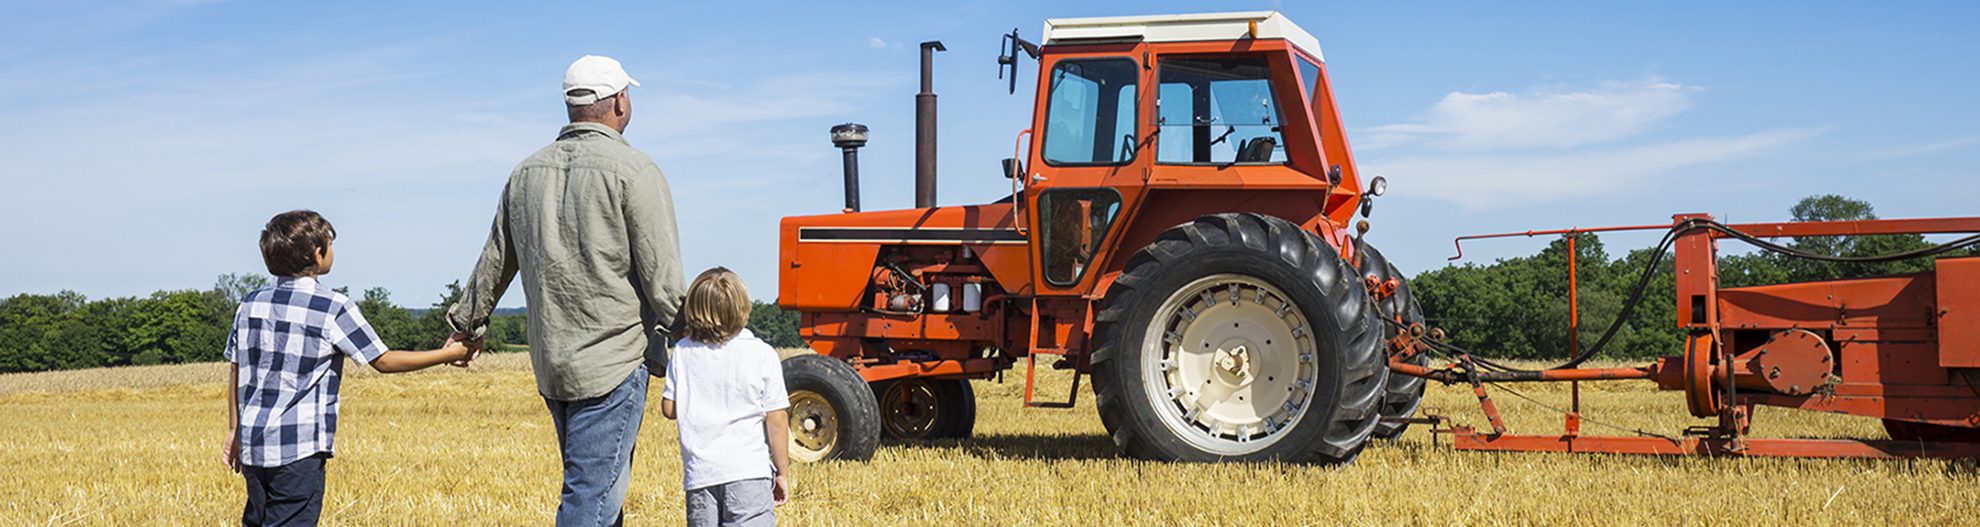 Man with children and tractor in field